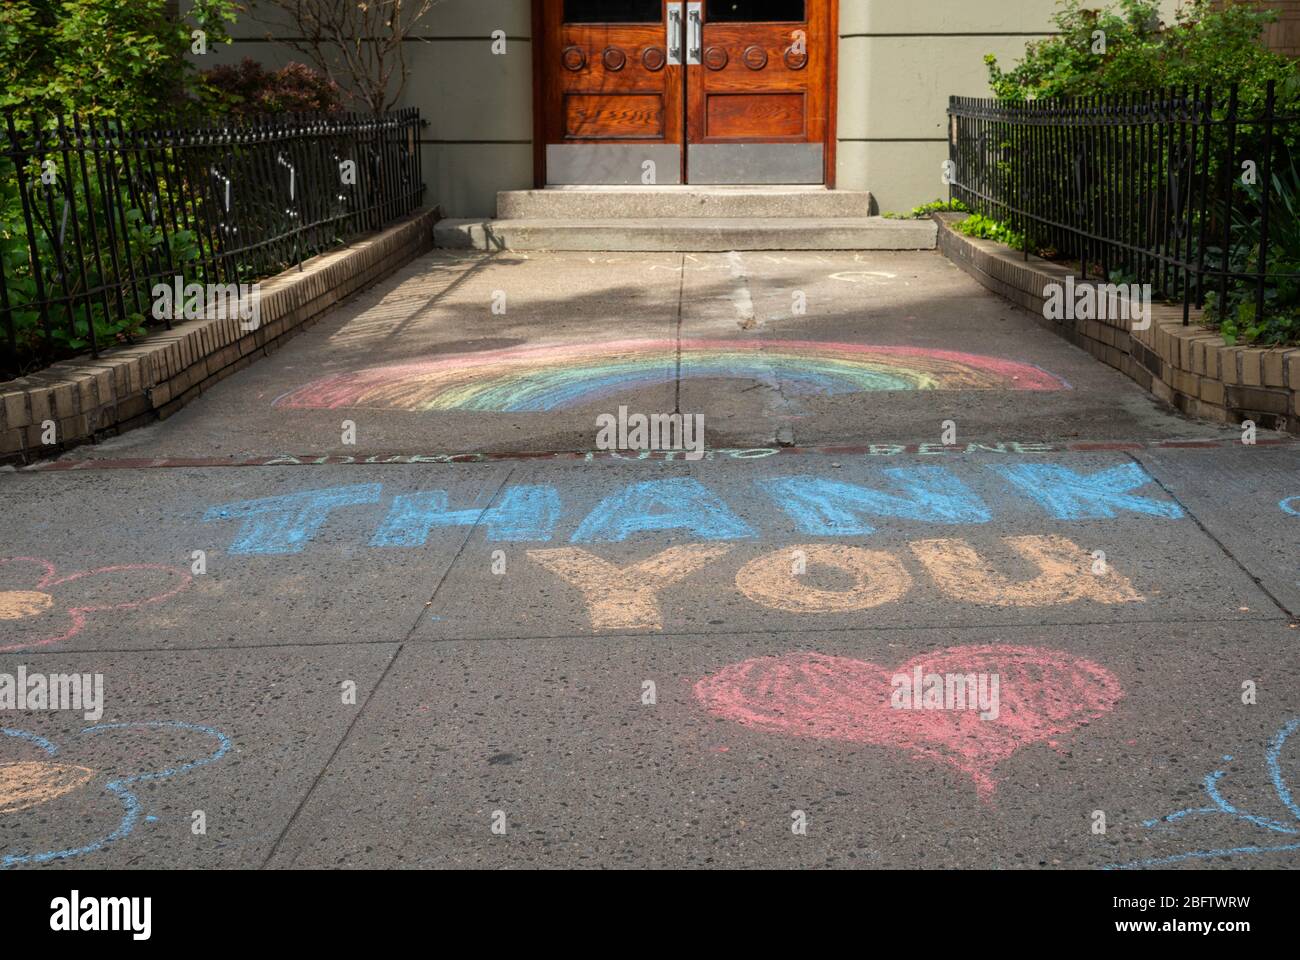 New York, NY, USA. April 19, 2020. Thank You messages of support written in chalk on the sidewalk outside of an apartment building on the Upper West S Stock Photo